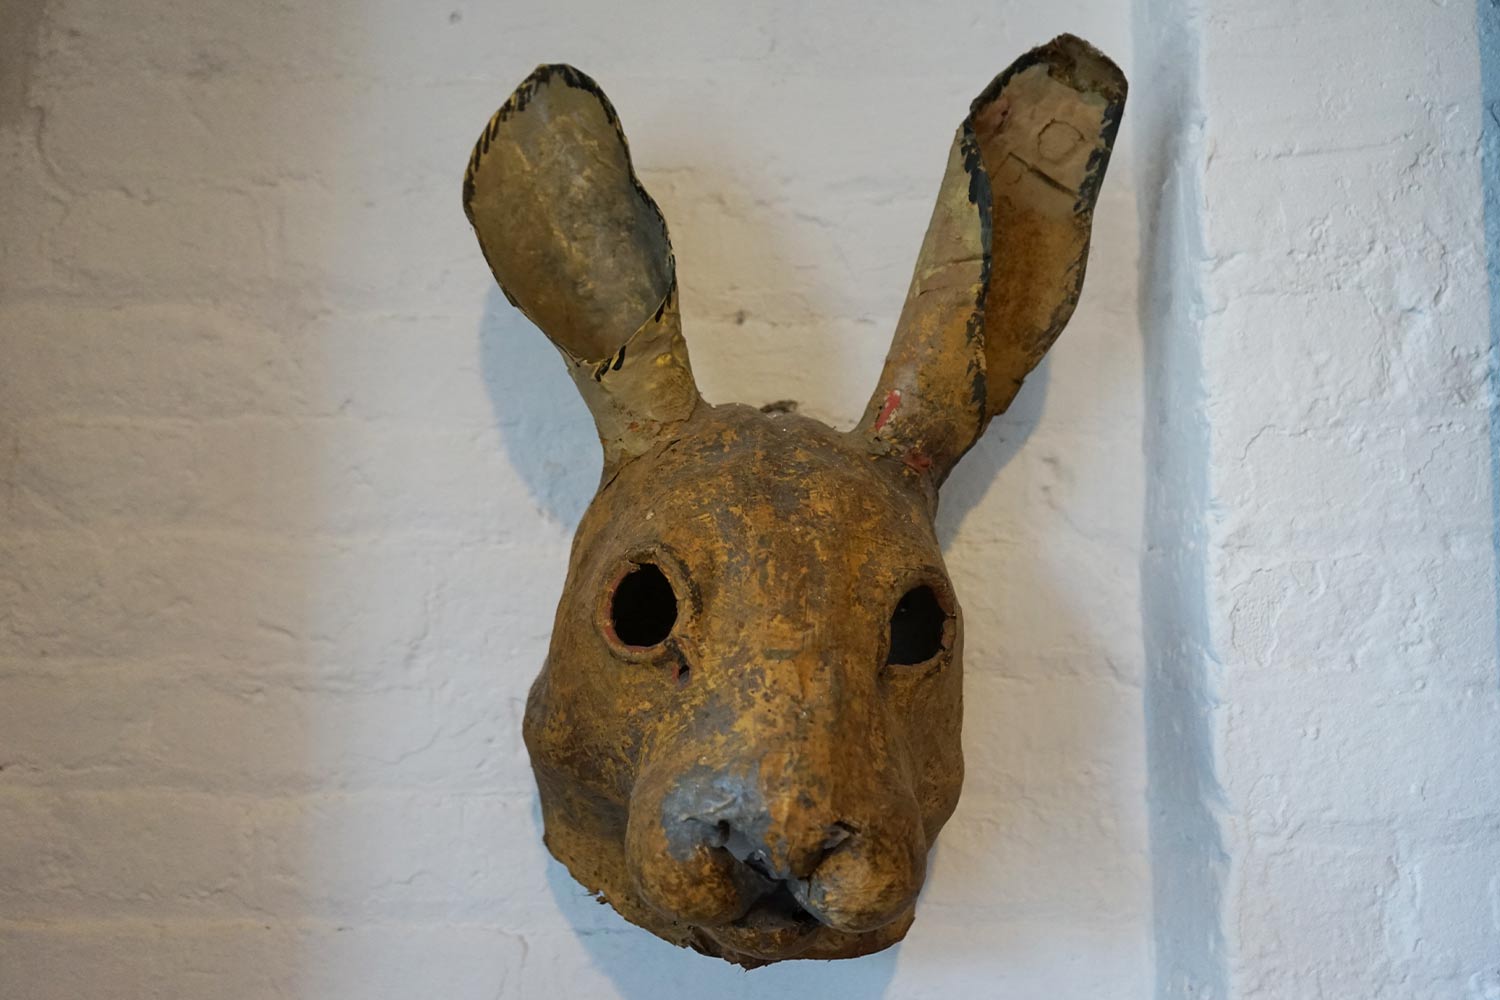 Paper mache rabbit hanging on the wall